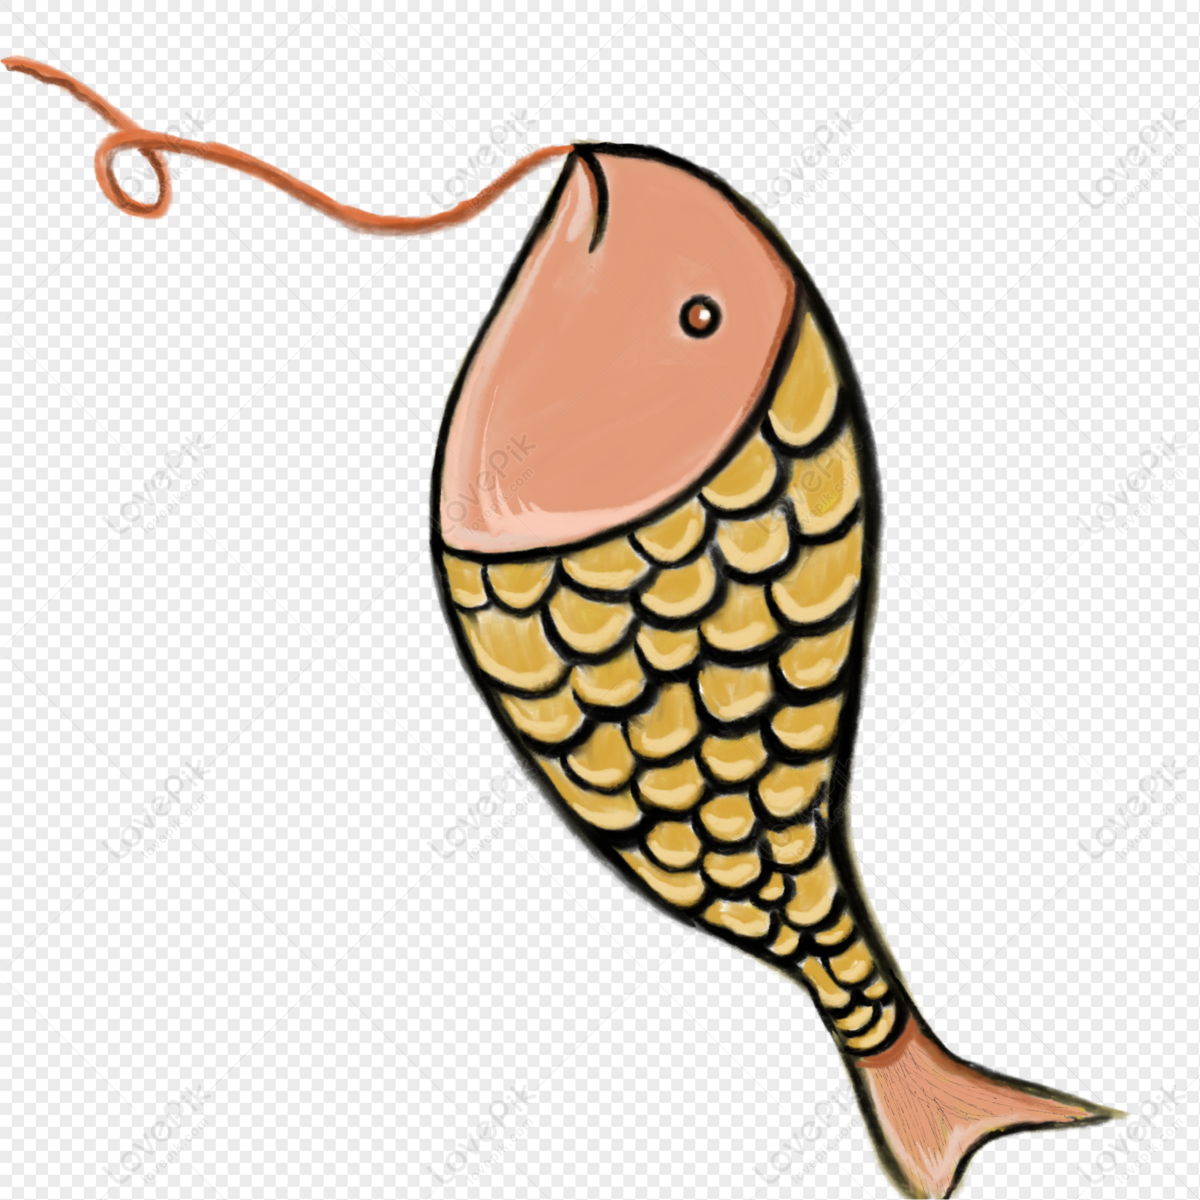 Hooked Fish Creative Illustration, Fish Shaped, Fish Hook, Creative  Illustration PNG Image And Clipart Image For Free Download - Lovepik